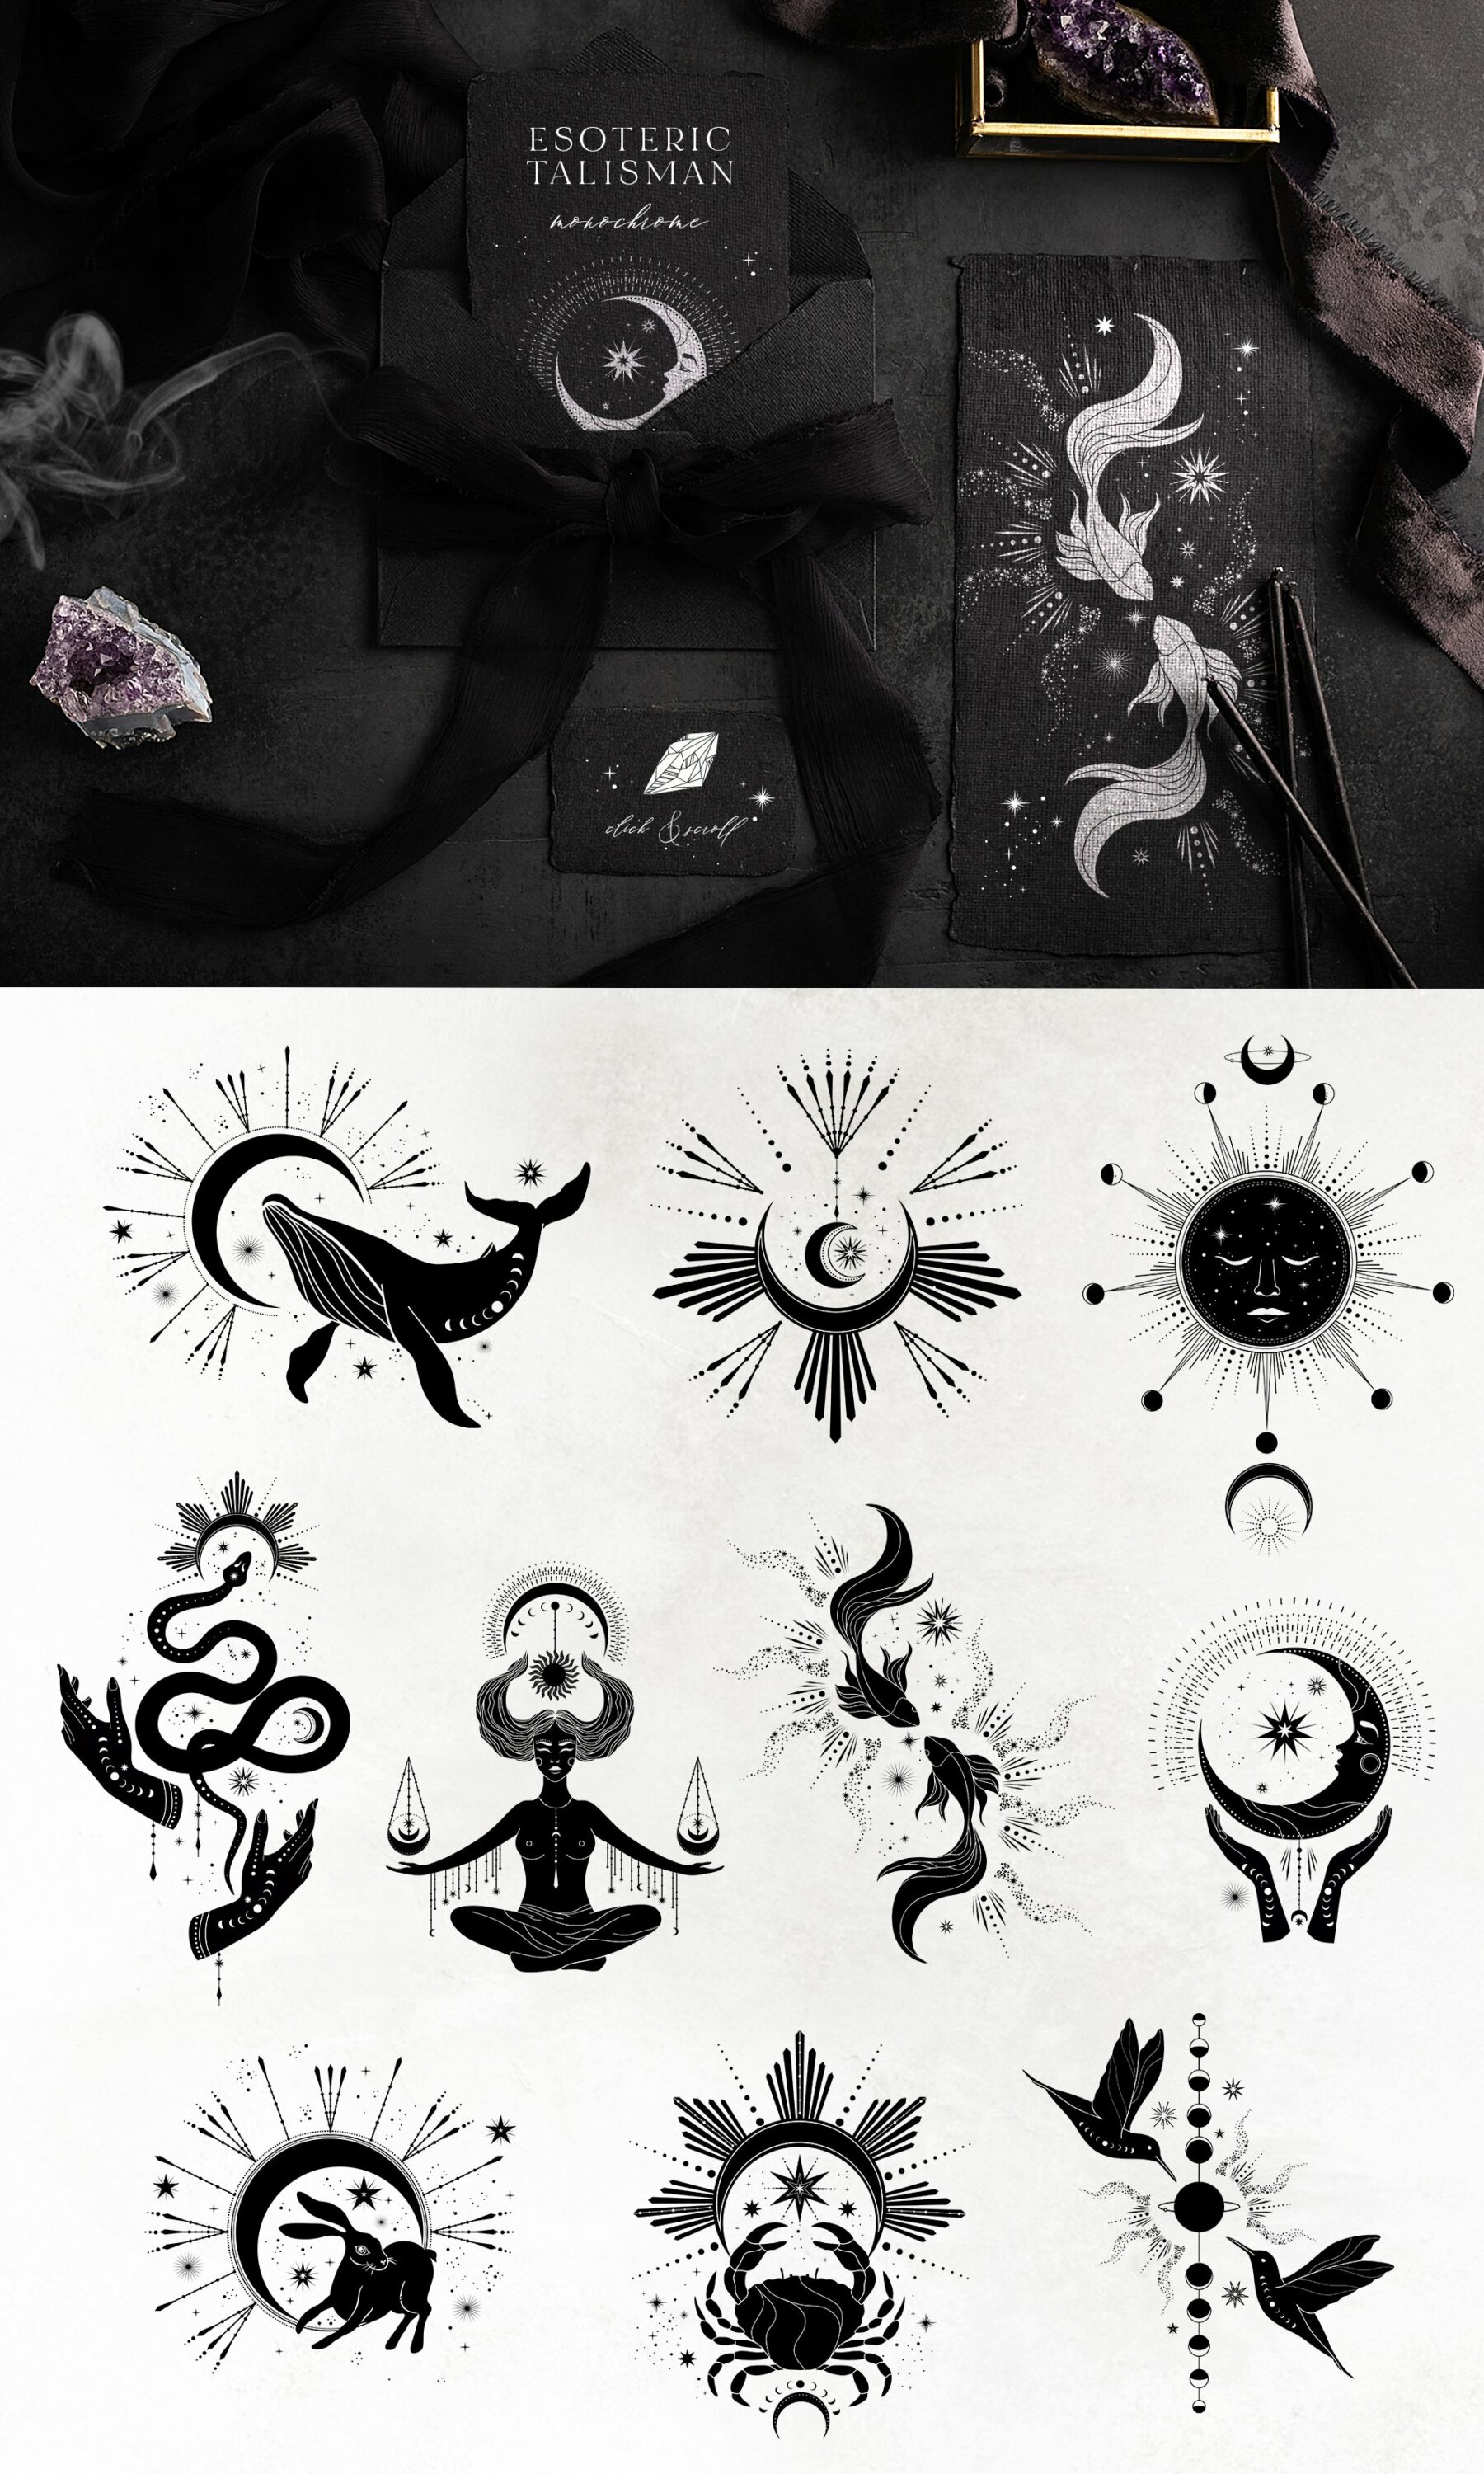 Creative black illustrations in a magic style.